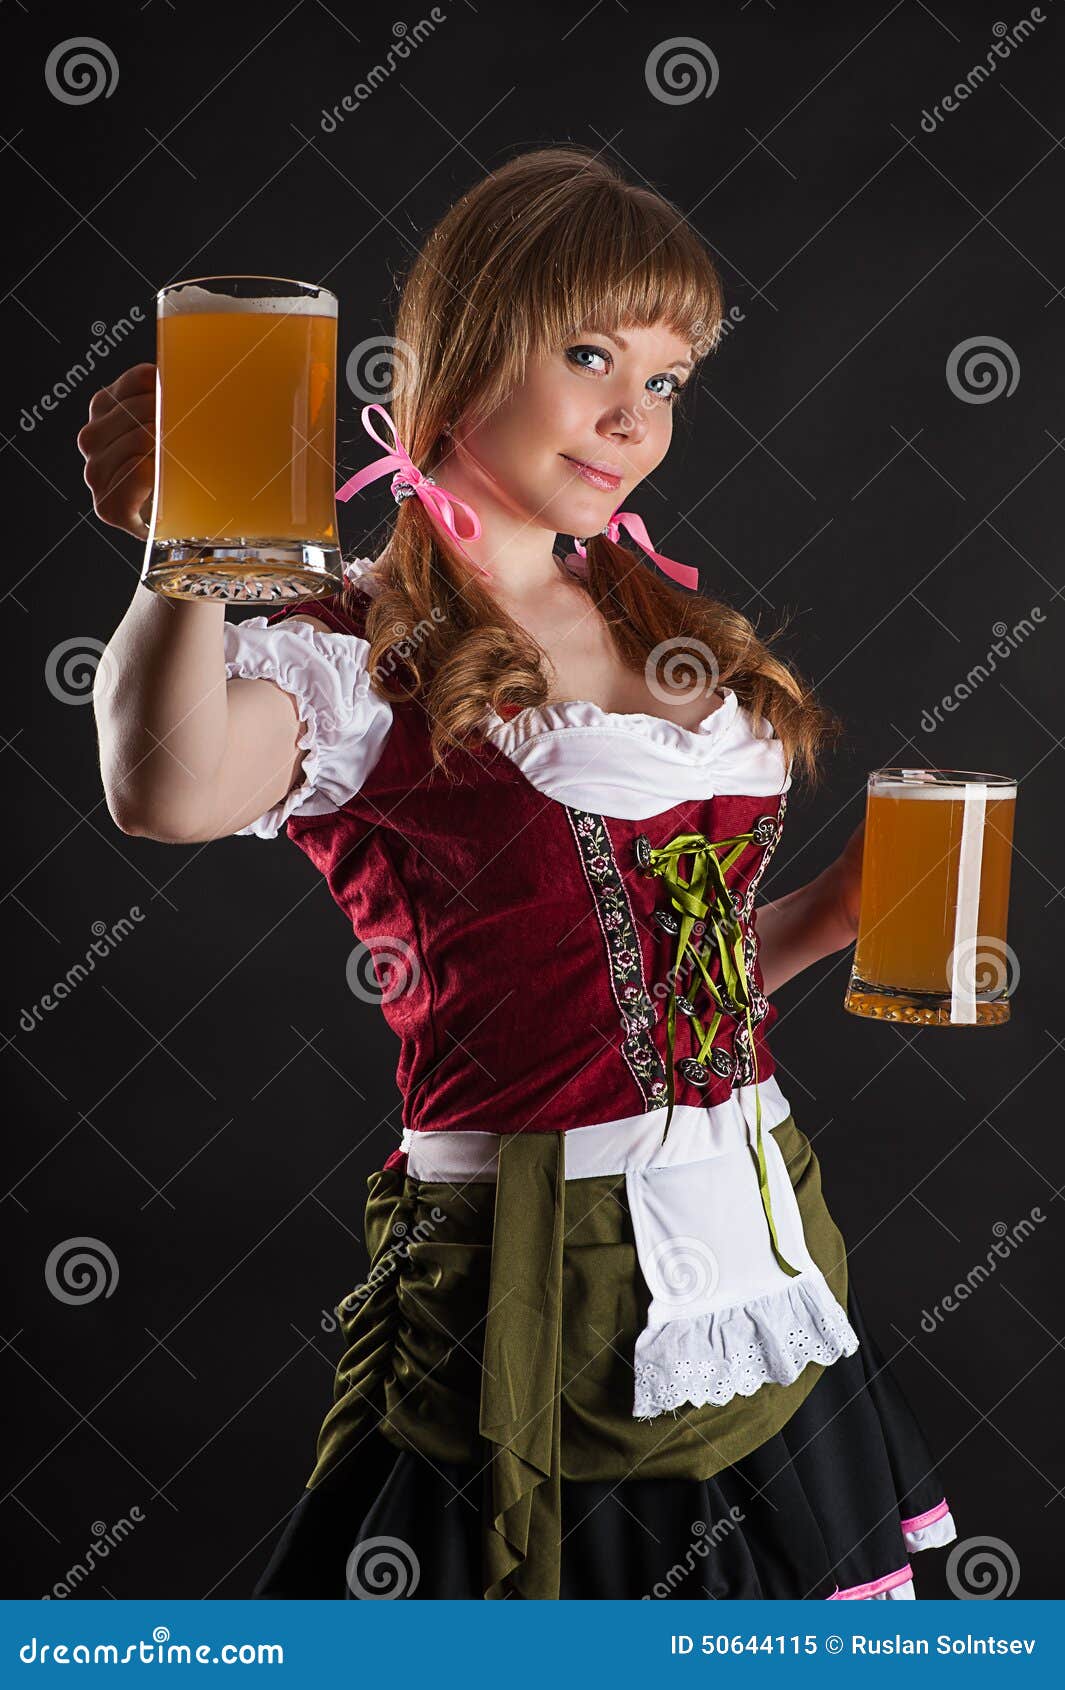 Blond Woman with Oktoberfest Beer in Hand Stock Image - Image of ...